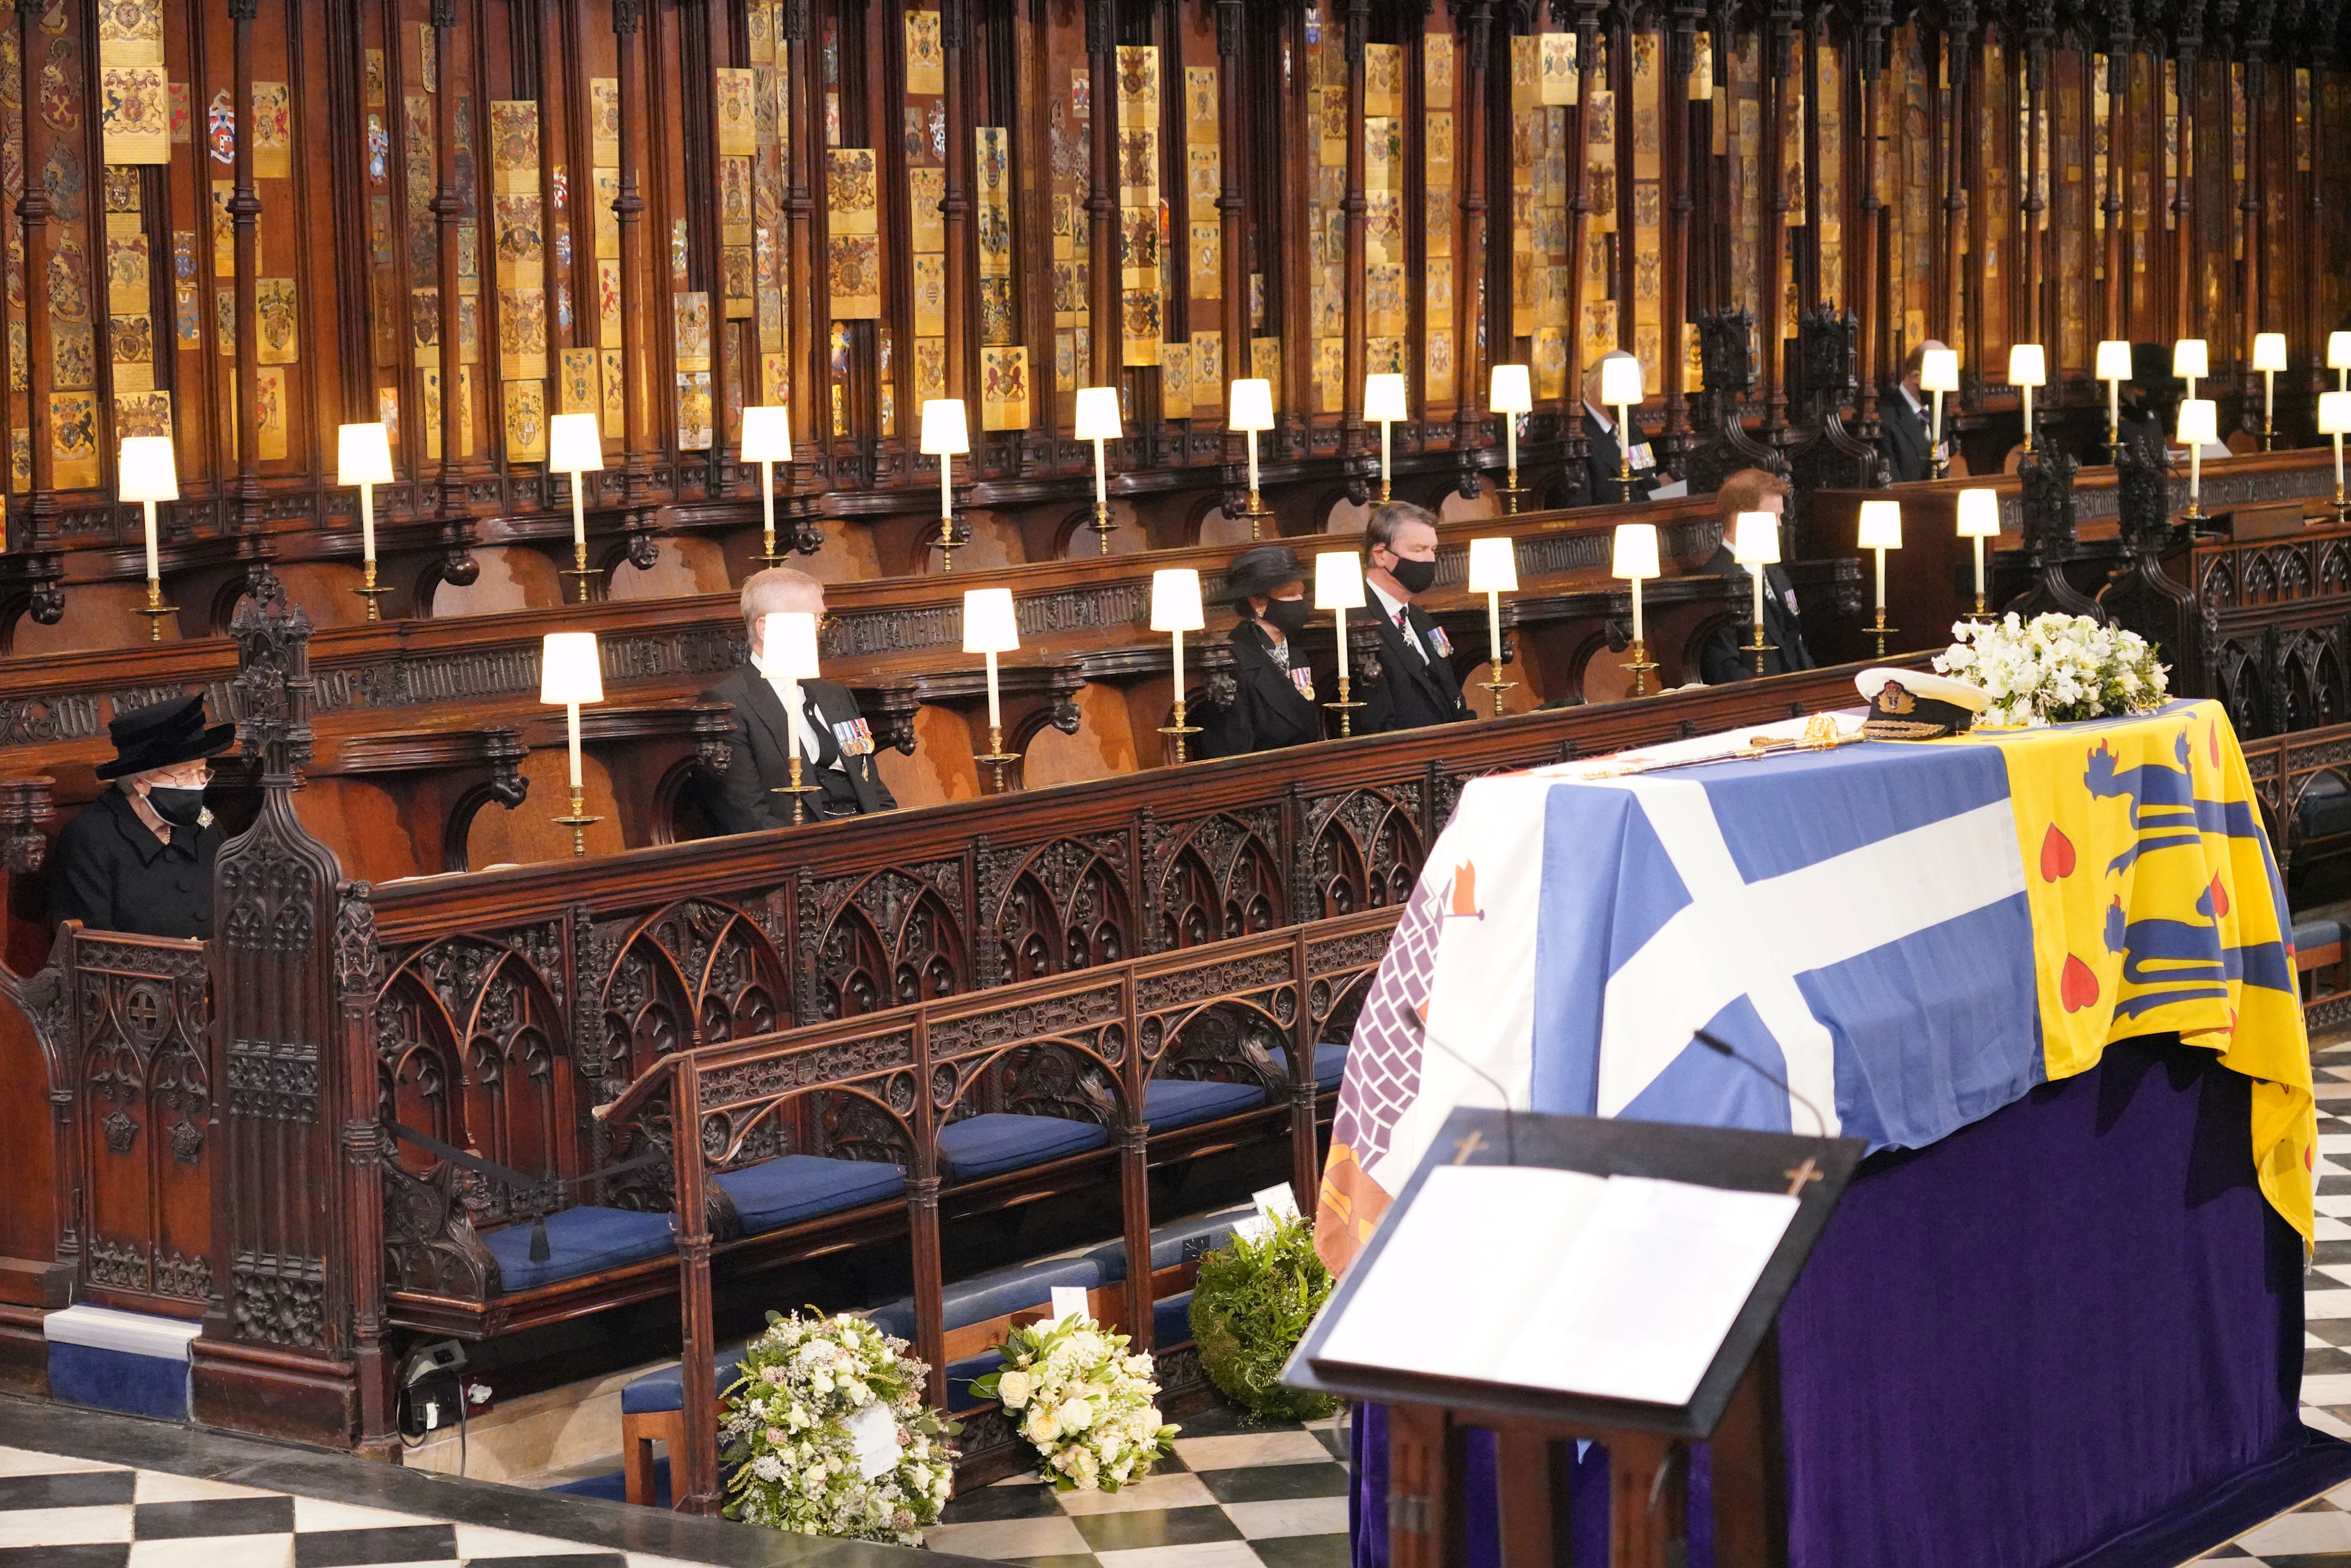 <p>Queen Elizabeth II mourned in front of the coffin of husband Prince Philip -- who died at 99 days earlier -- during <a href="https://www.wonderwall.com/celebrity/royals/prince-philips-funeral-all-the-photos-and-details-447299.gallery">his funeral service</a> at St. George's Chapel at Windsor Castle in Windsor, England, on April 17, 2021.</p>